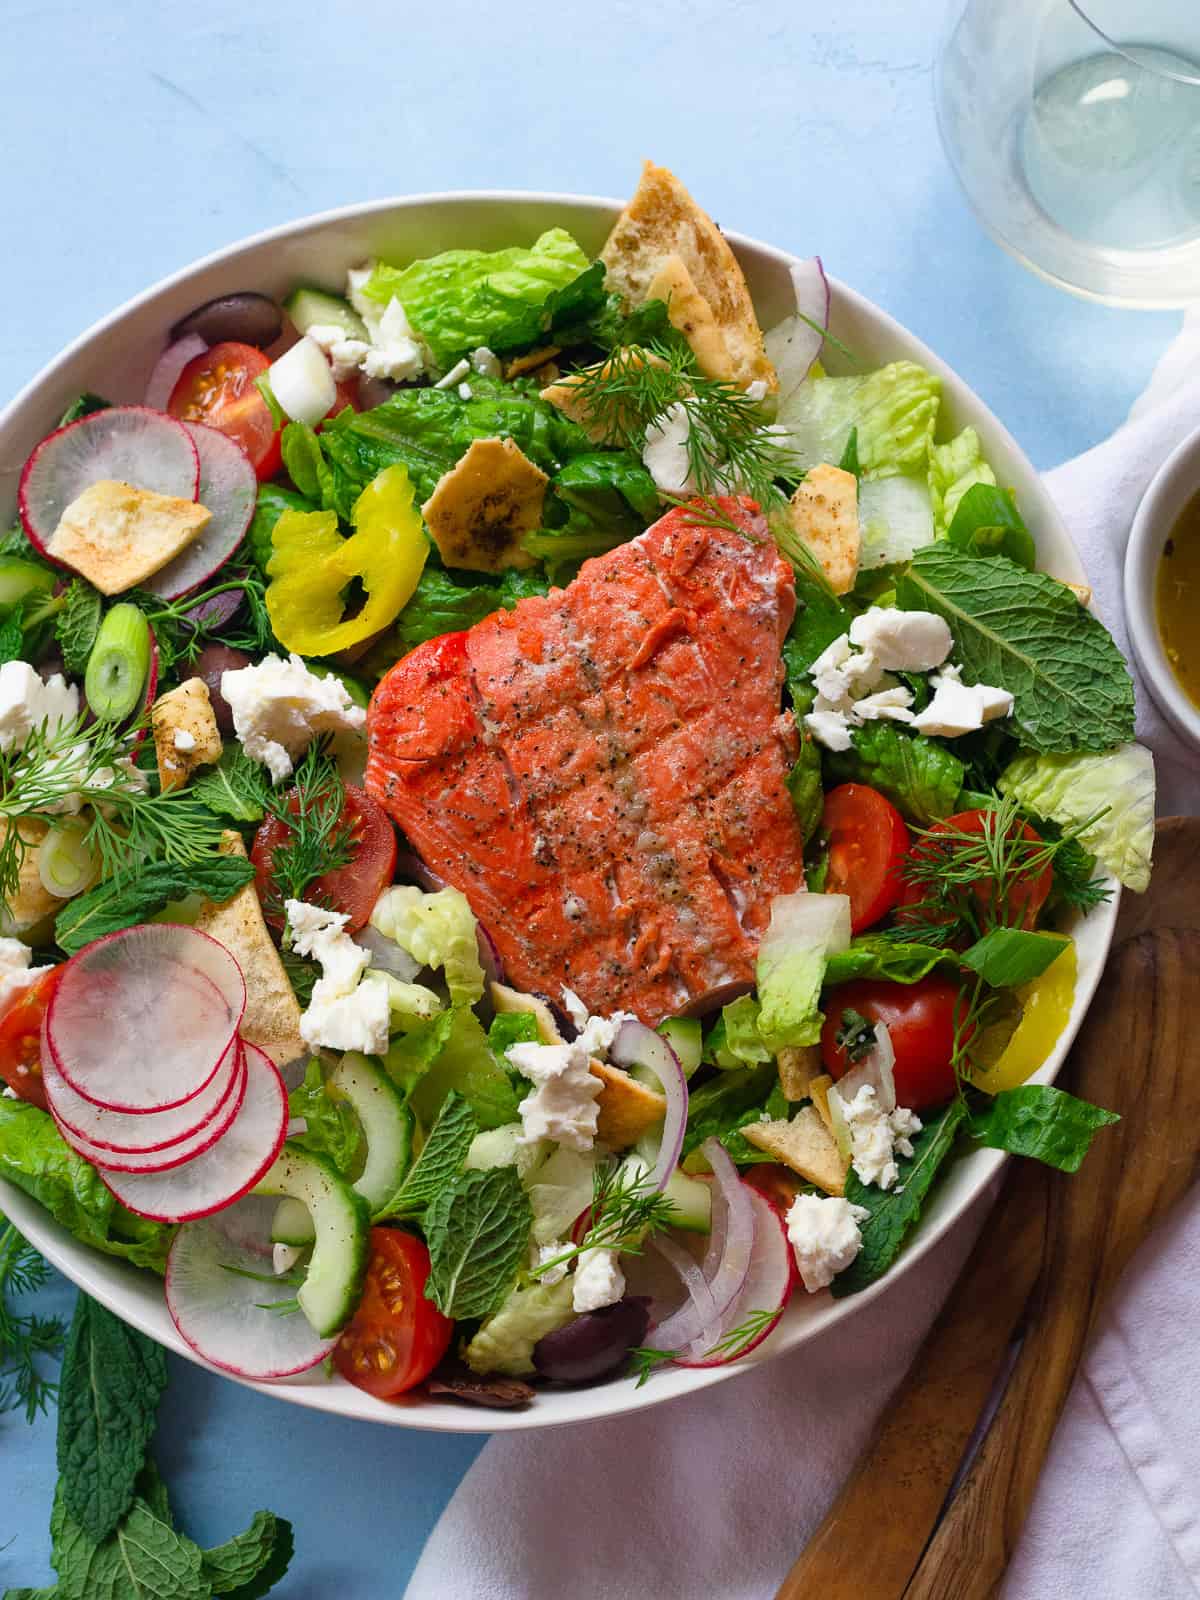 Greek salmon salad recipe with fresh mint and red wine dressing.